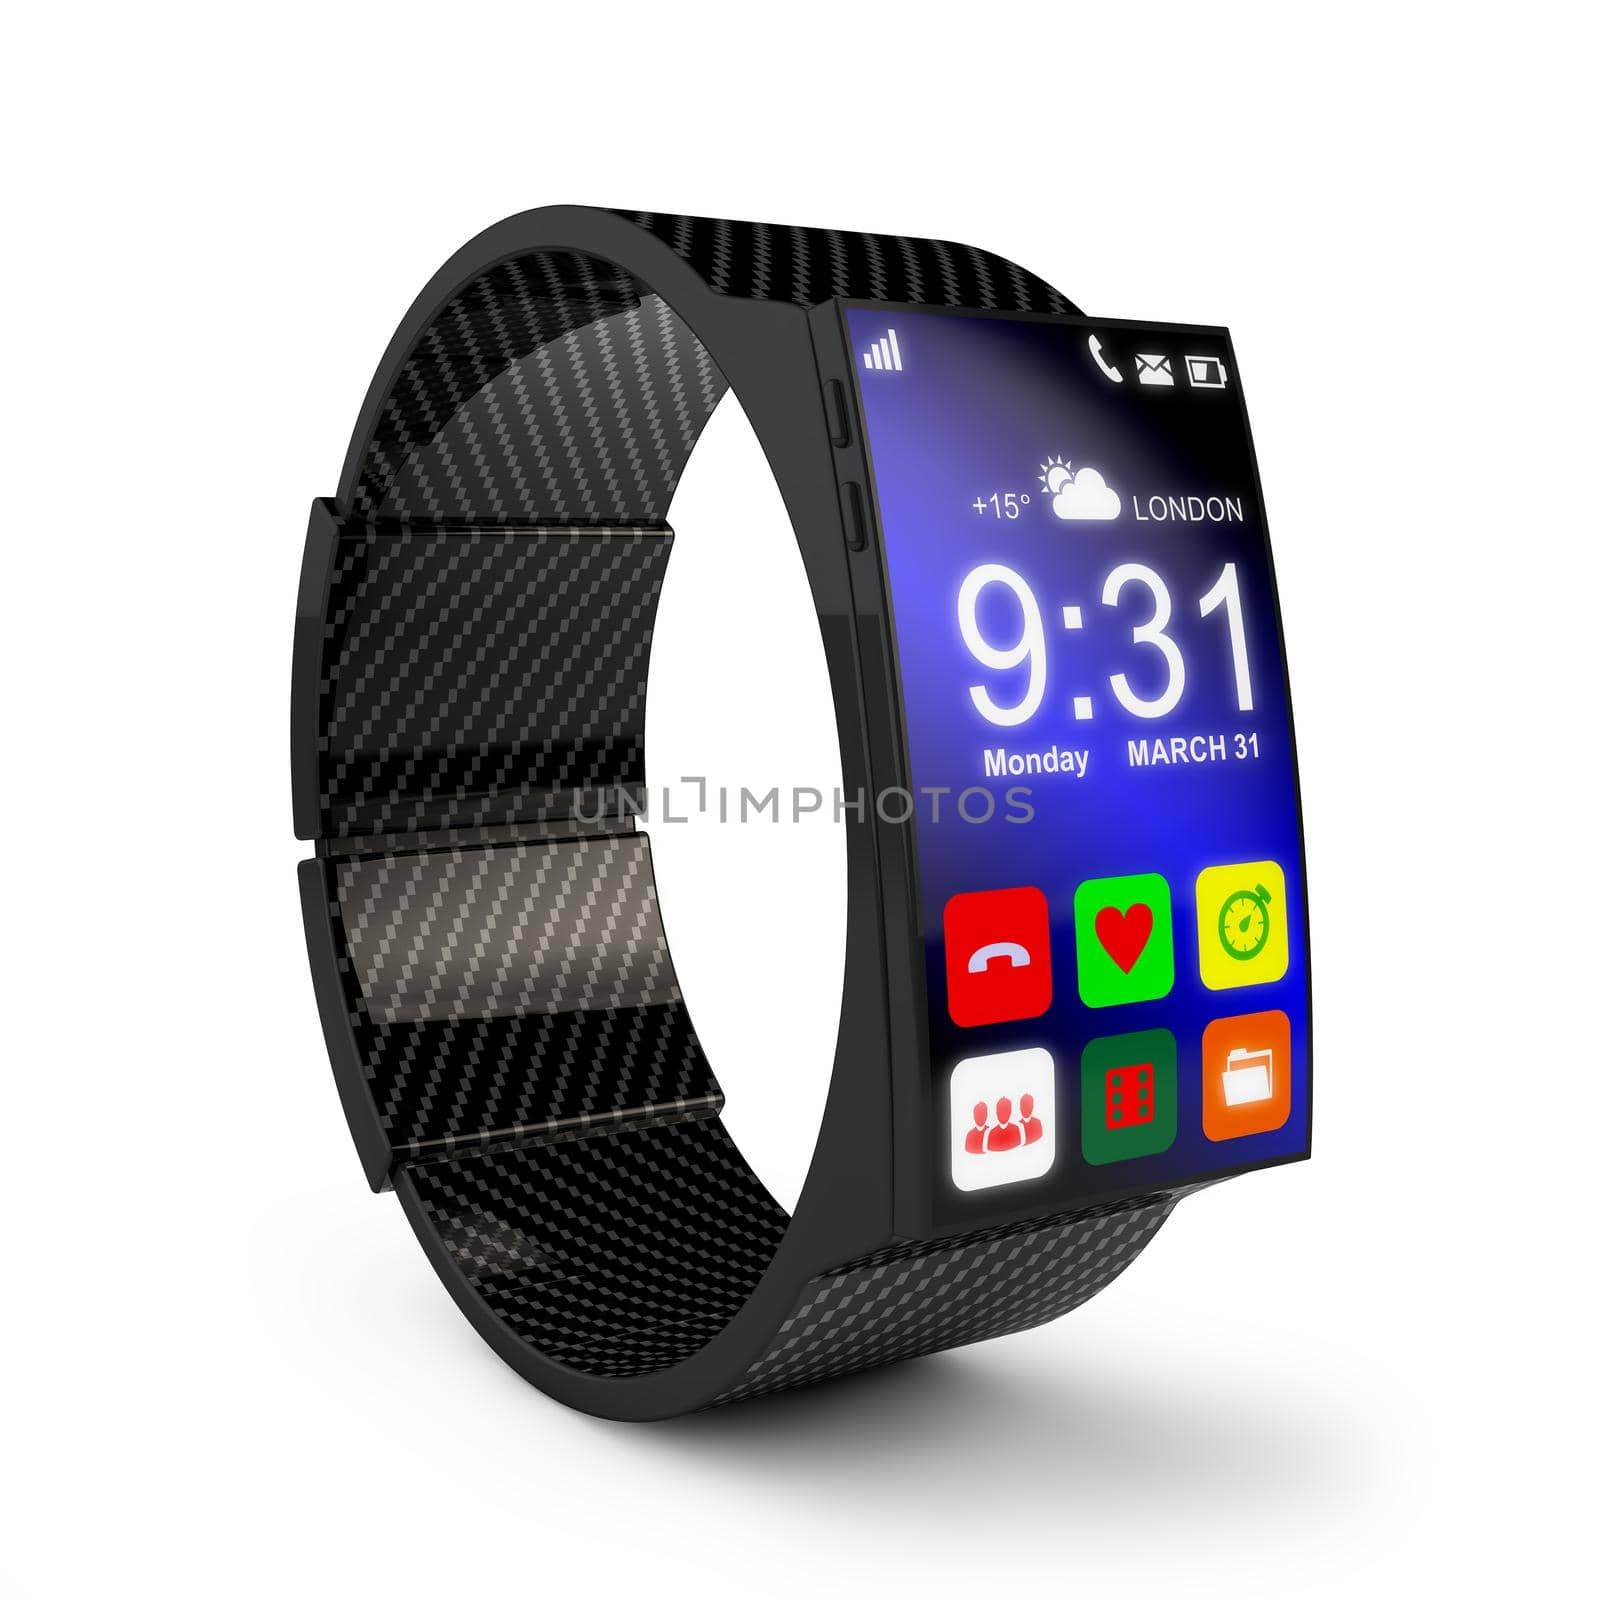 smart watches in carbon design on a white background